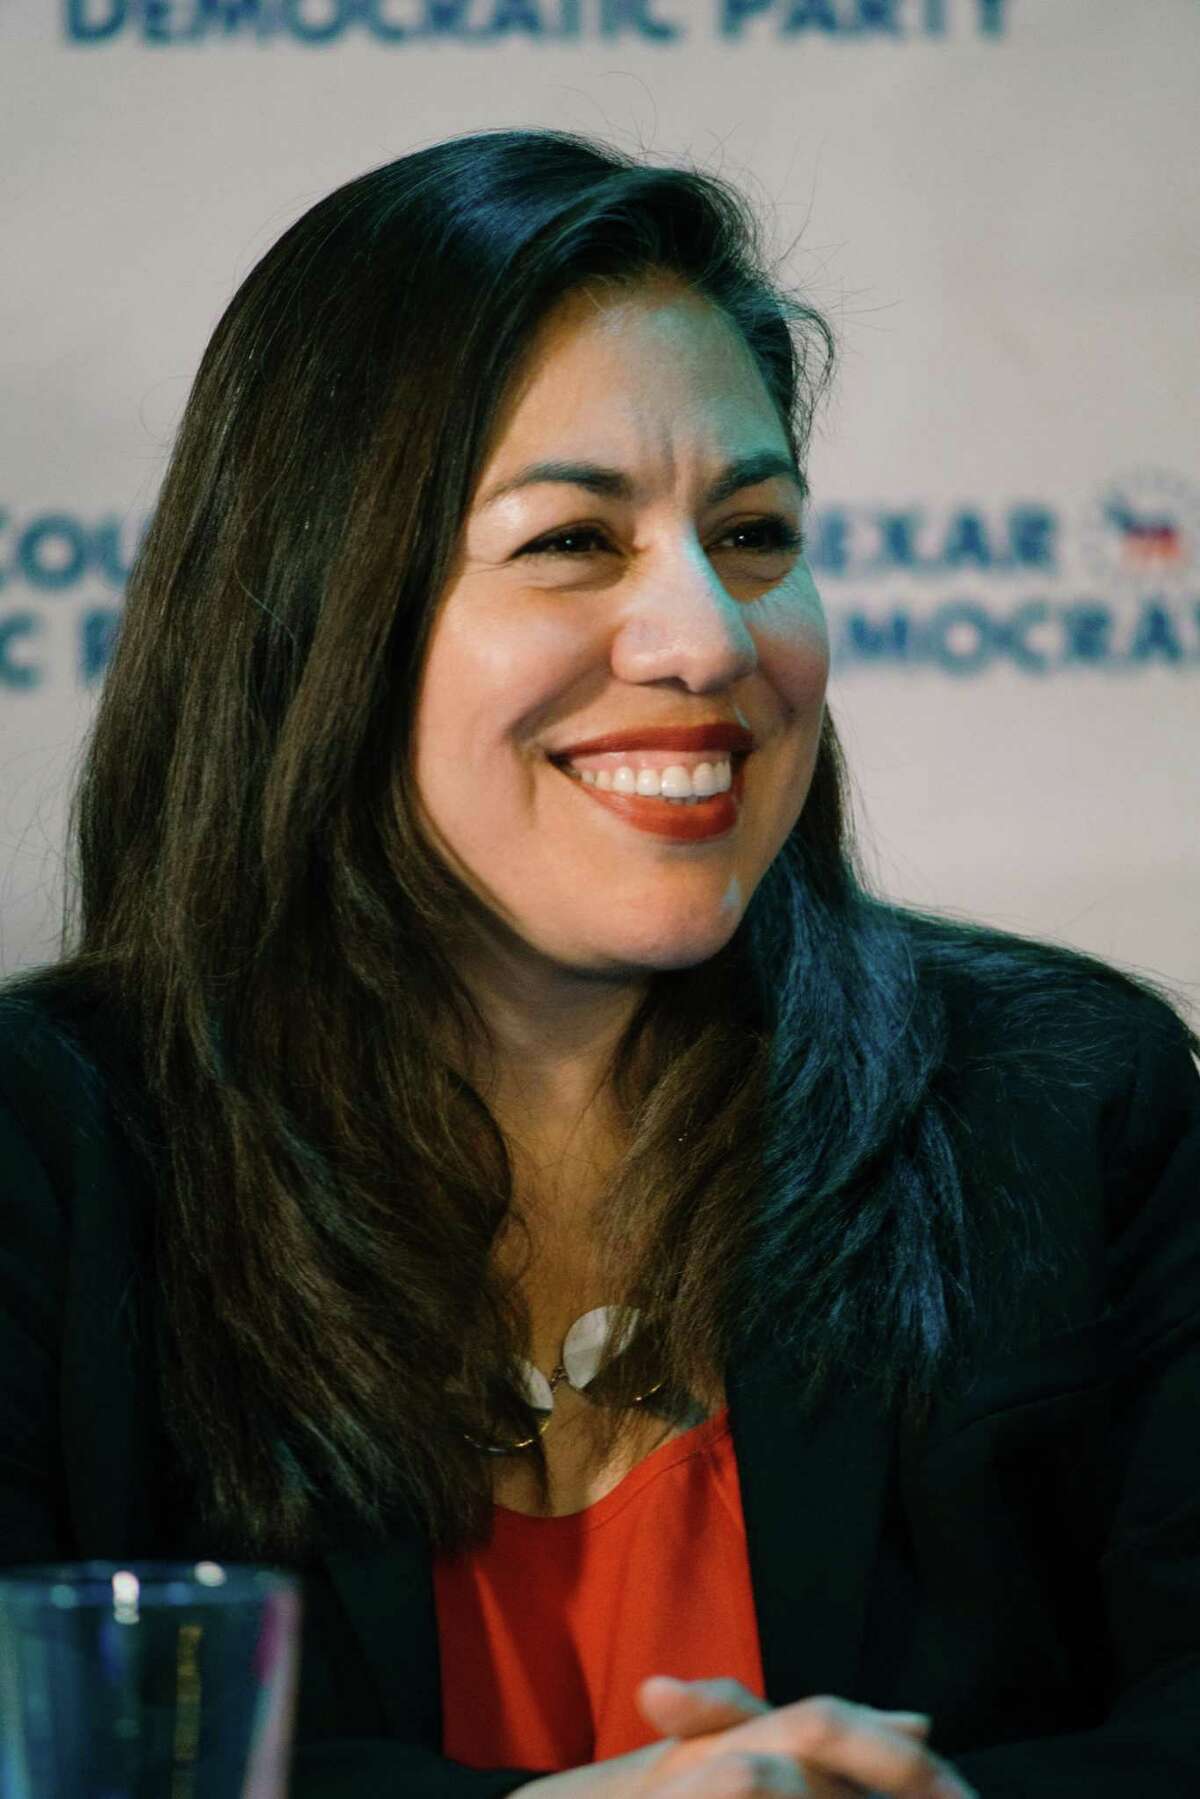 Democratic Candidate Queta Rodriguez smiles during a debate in January. She’s seeking to oust longstanding Bexar County Commissioner Paul Elizondo for the Precinct 2 seat.